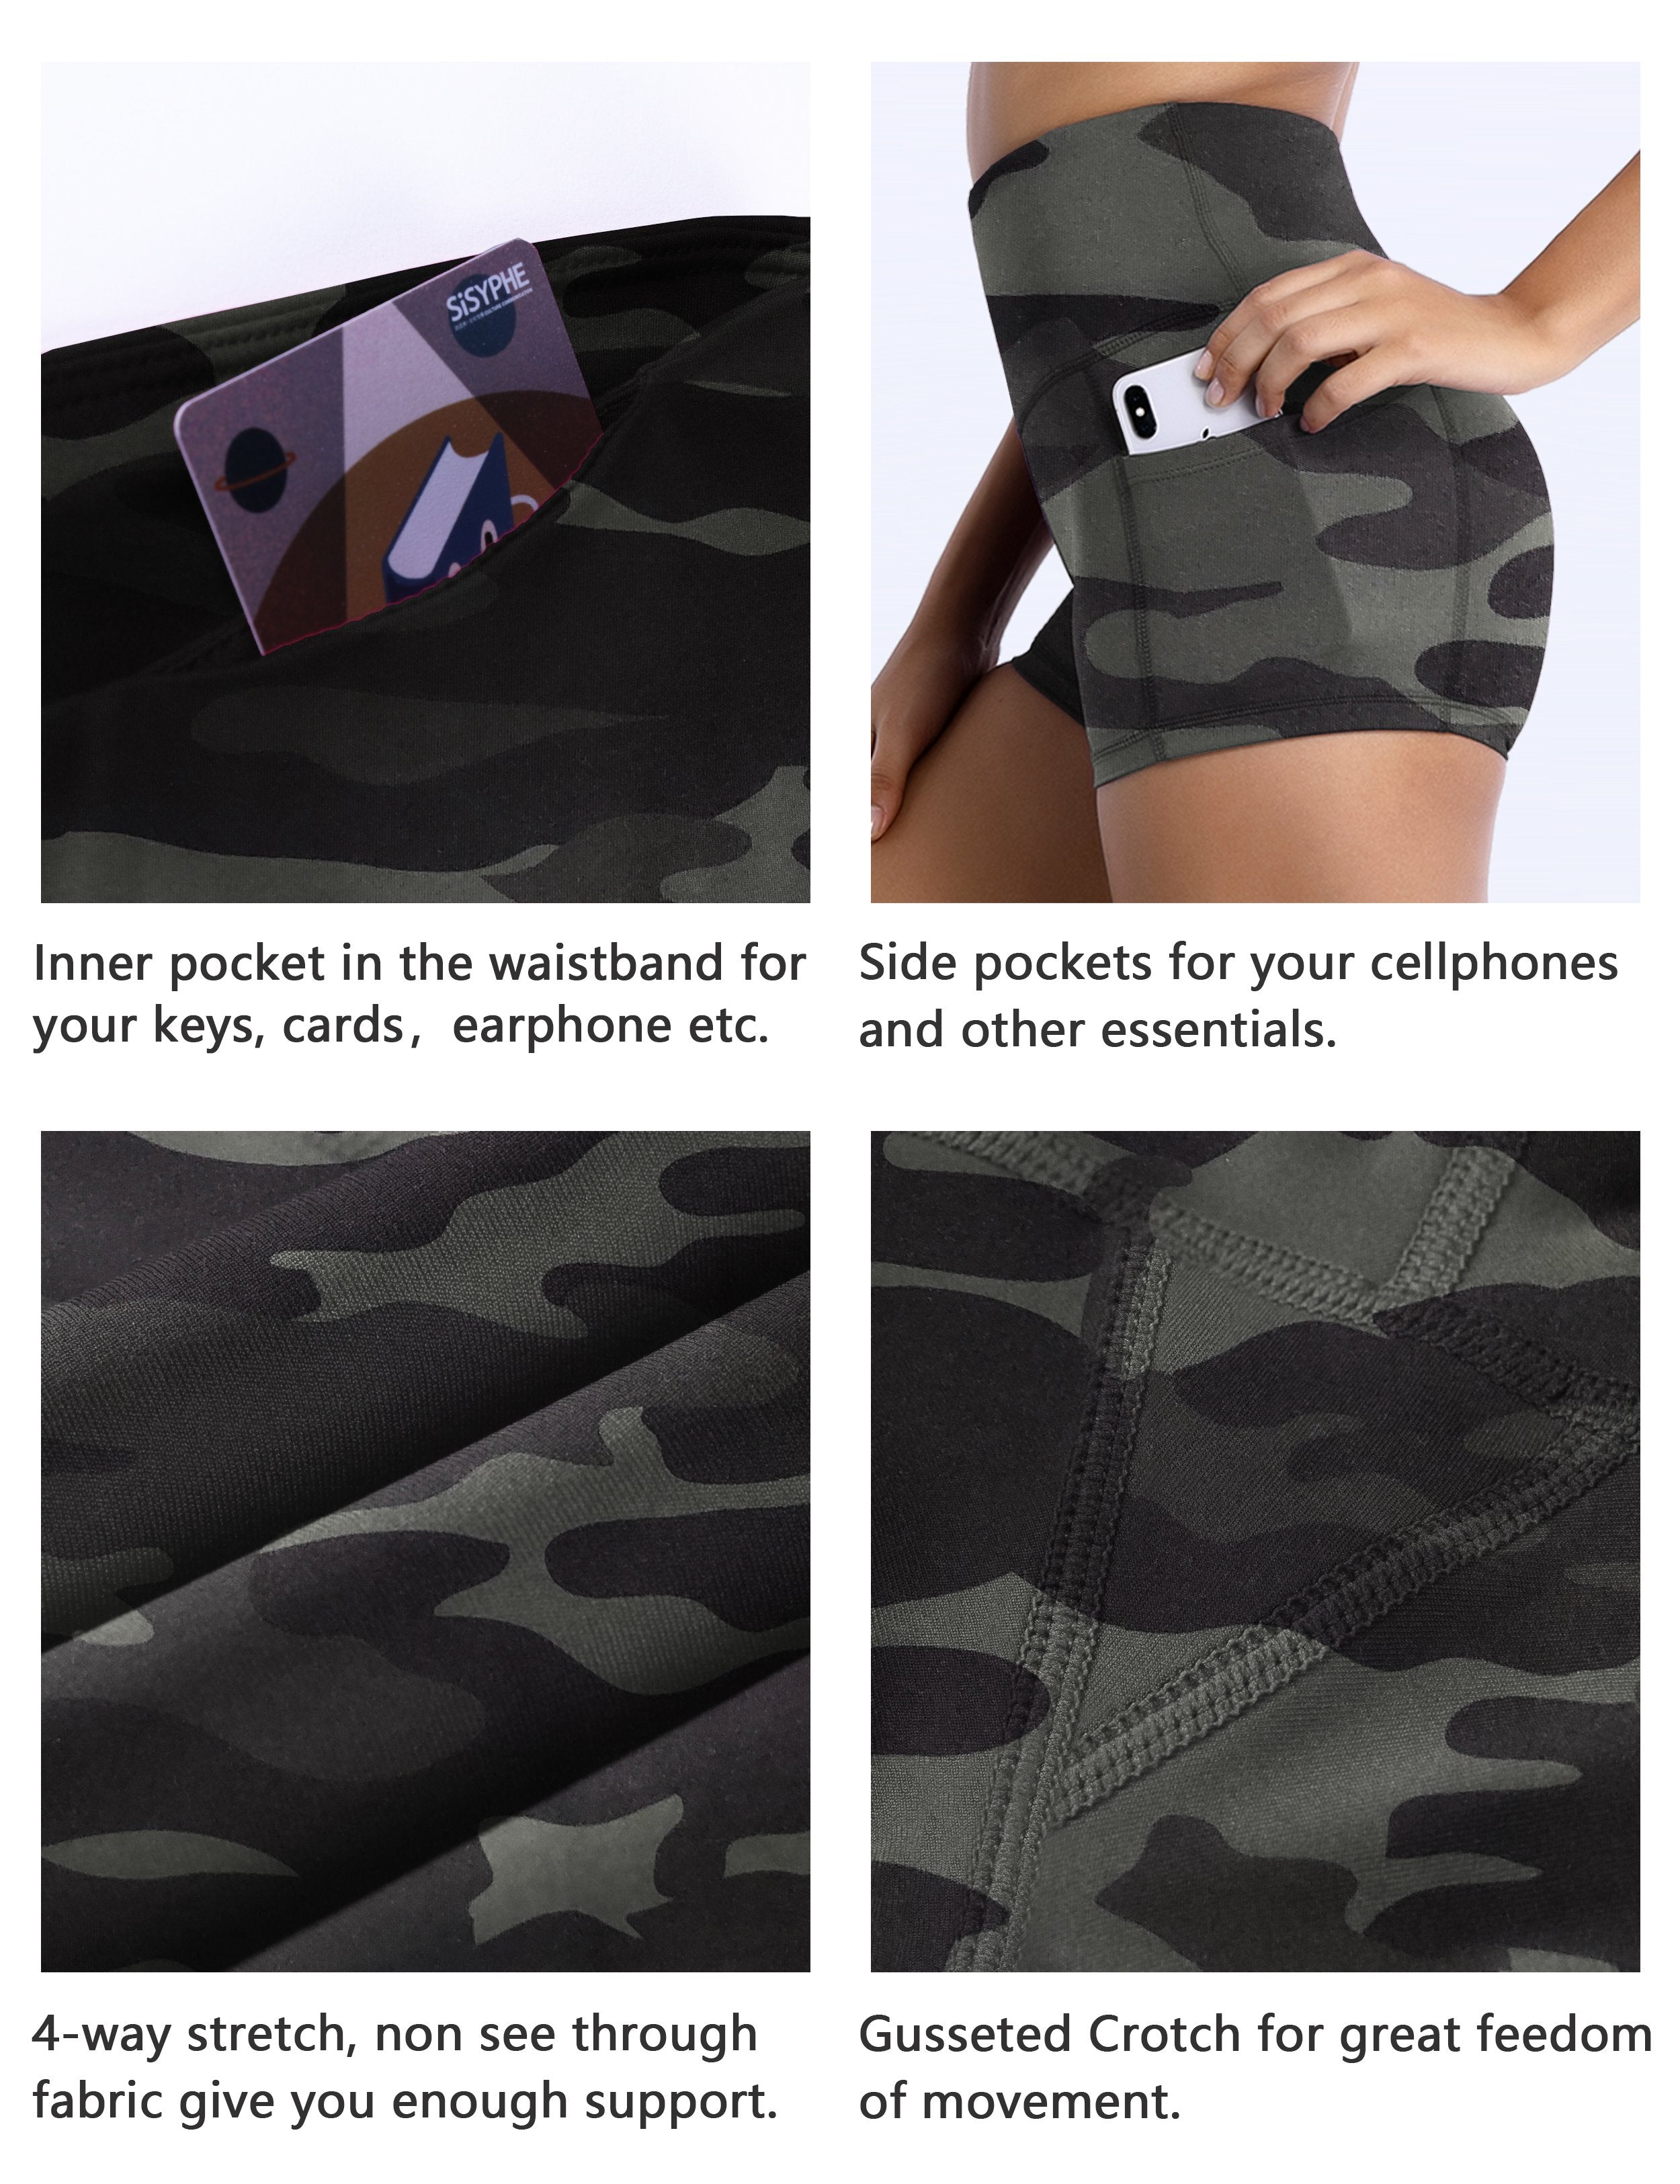 2.5" Printed Side Pockets Yoga Shorts dimgraycamo Sleek, soft, smooth and totally comfortable: our newest sexy style is here. Softest-ever fabric High elasticity High density 4-way stretch Fabric doesn't attract lint easily No see-through Moisture-wicking Machine wash 78% Polyester, 22% Spandex